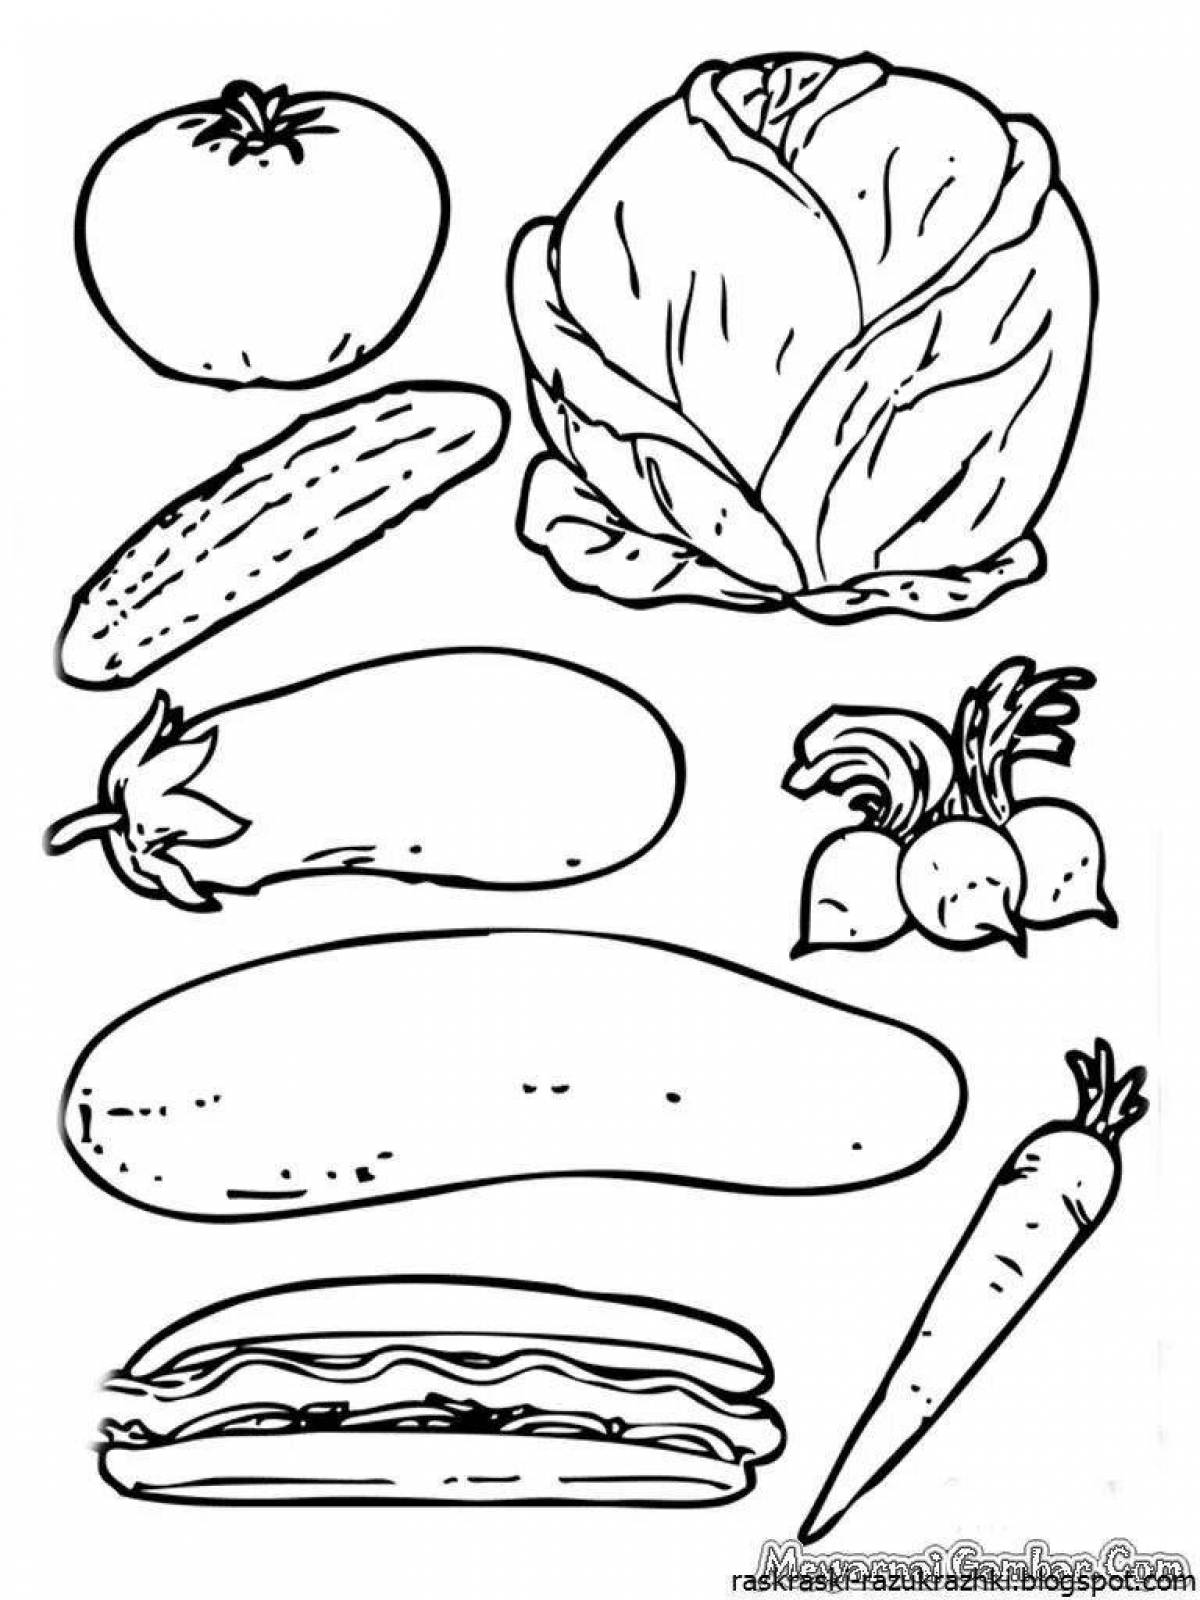 Colorful vegetable coloring book for 3-4 year olds